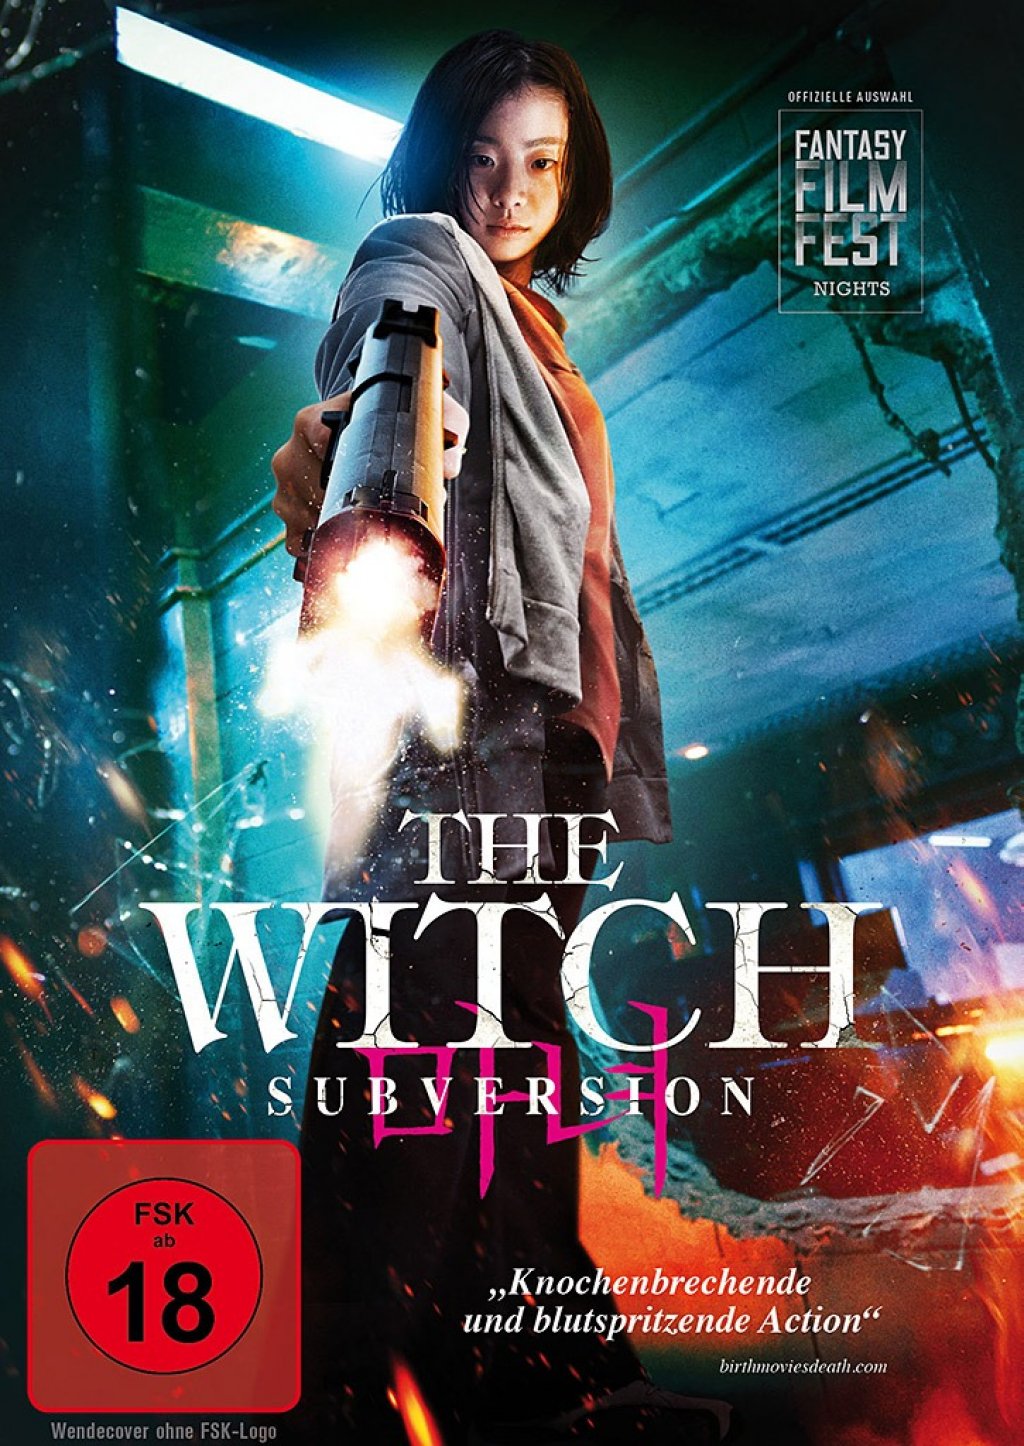 The Witch Part 1 The Subversion